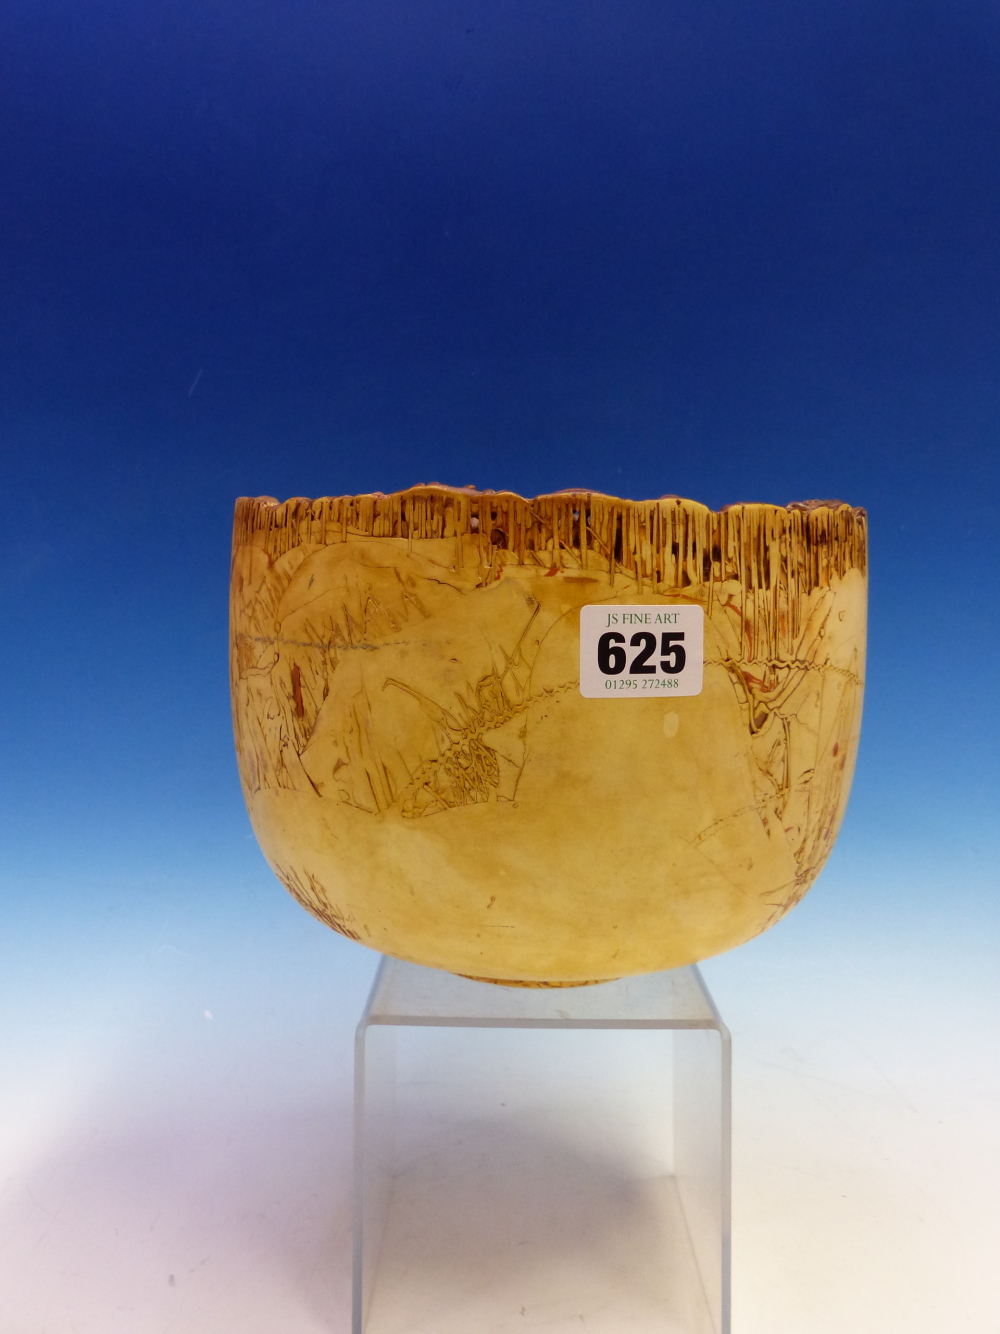 A STUDIO POTTERY BOWL BUILT OF DRIPS AND BLOCKS OF BEIGE SLIPS WITH TERRACOTTA RED INCLUSIONS, THE